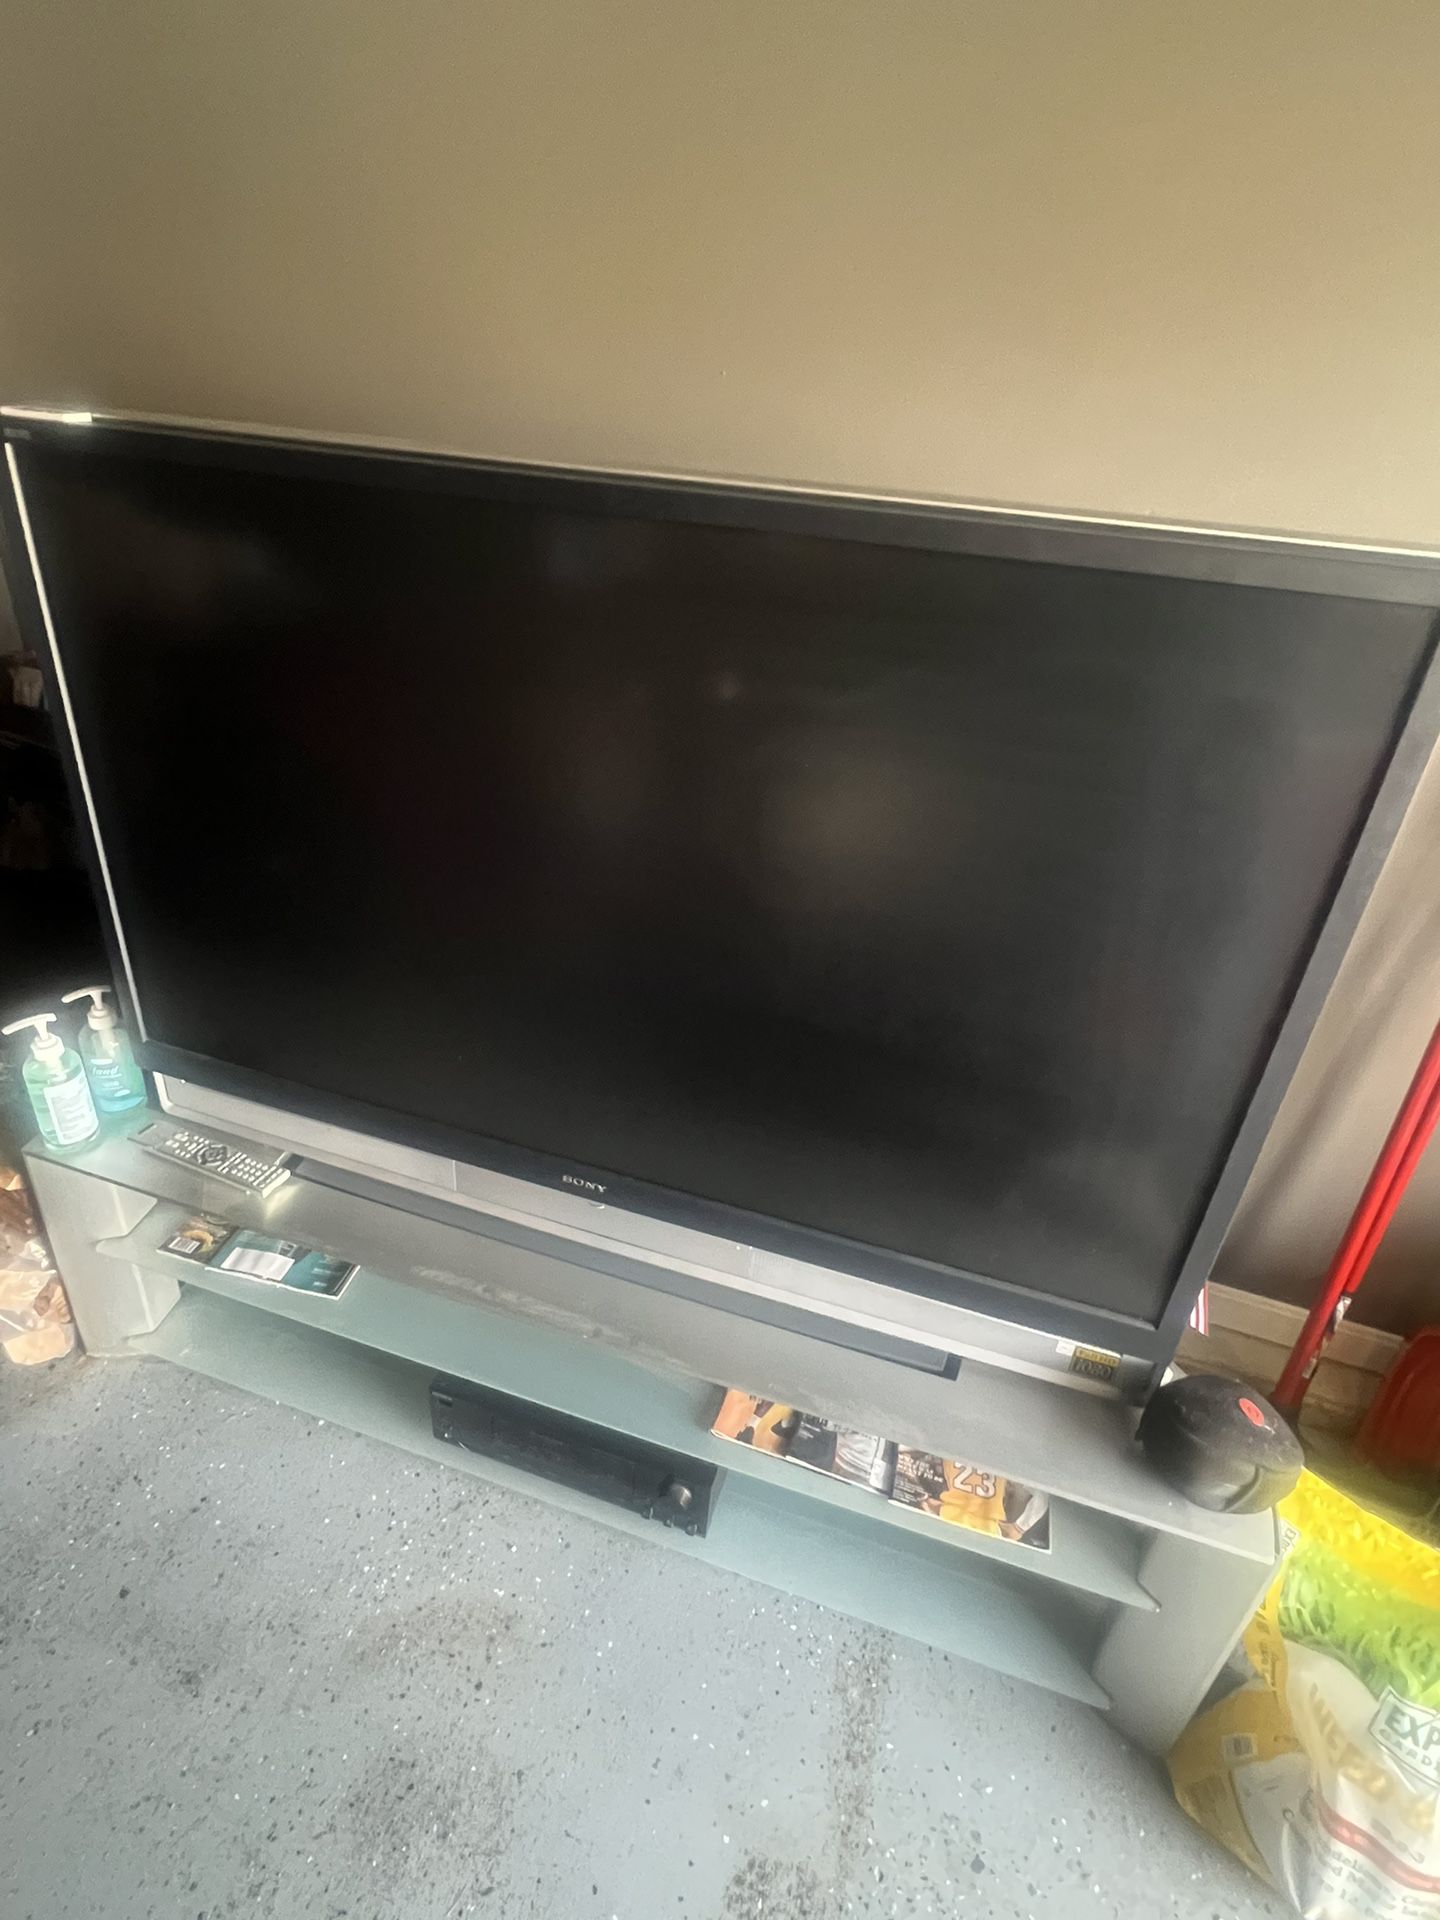 Sony 60” HDTV With Stand